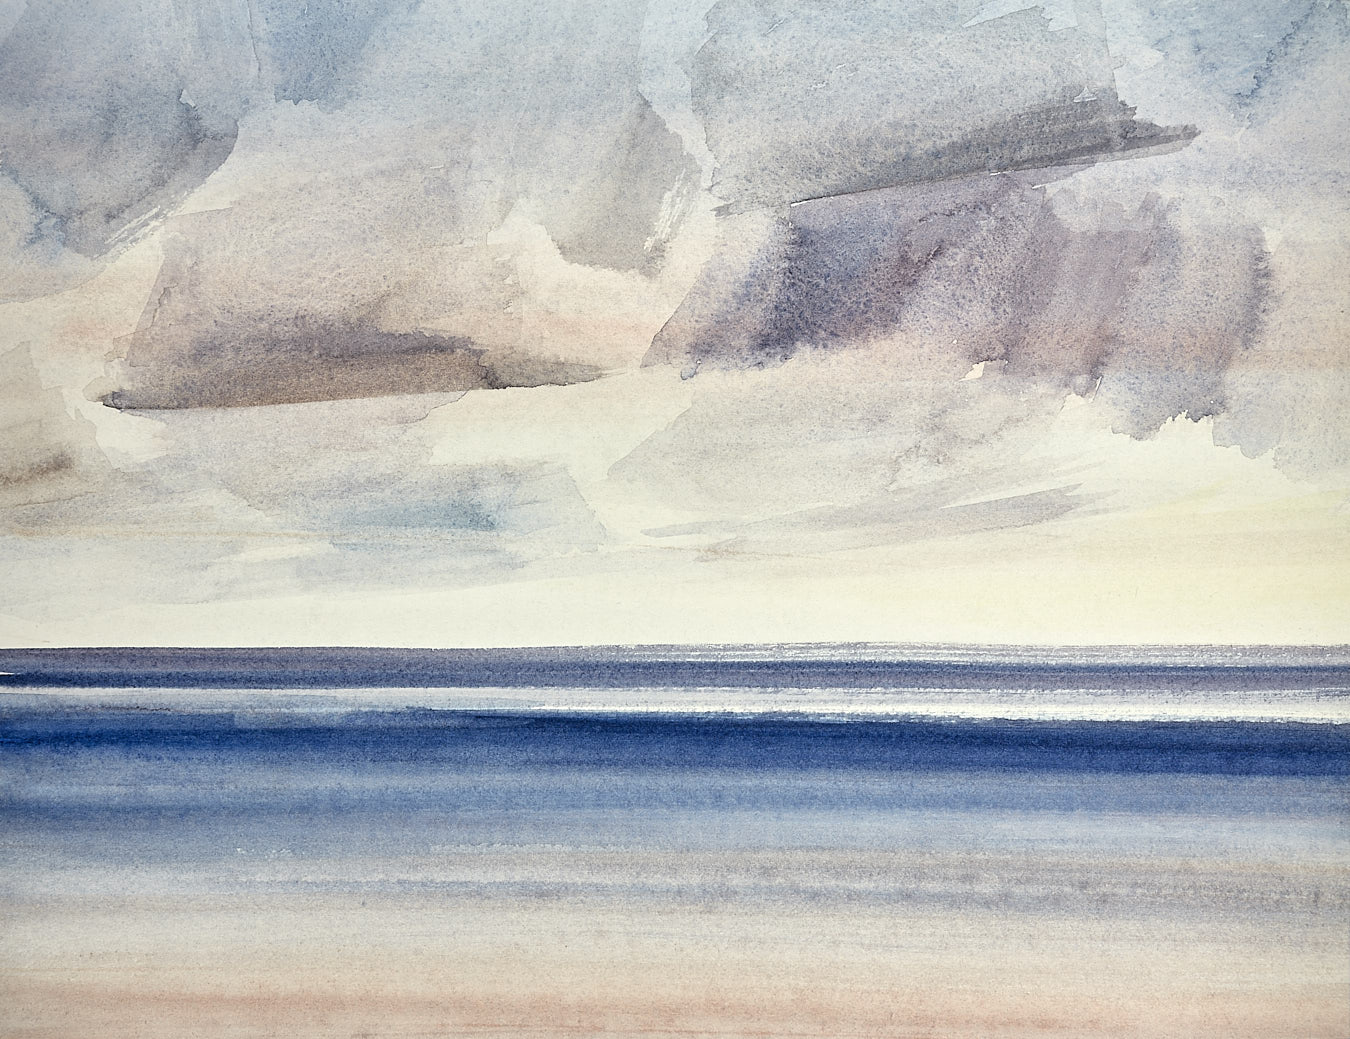 Large image of Sunset by the shore original watercolour painting